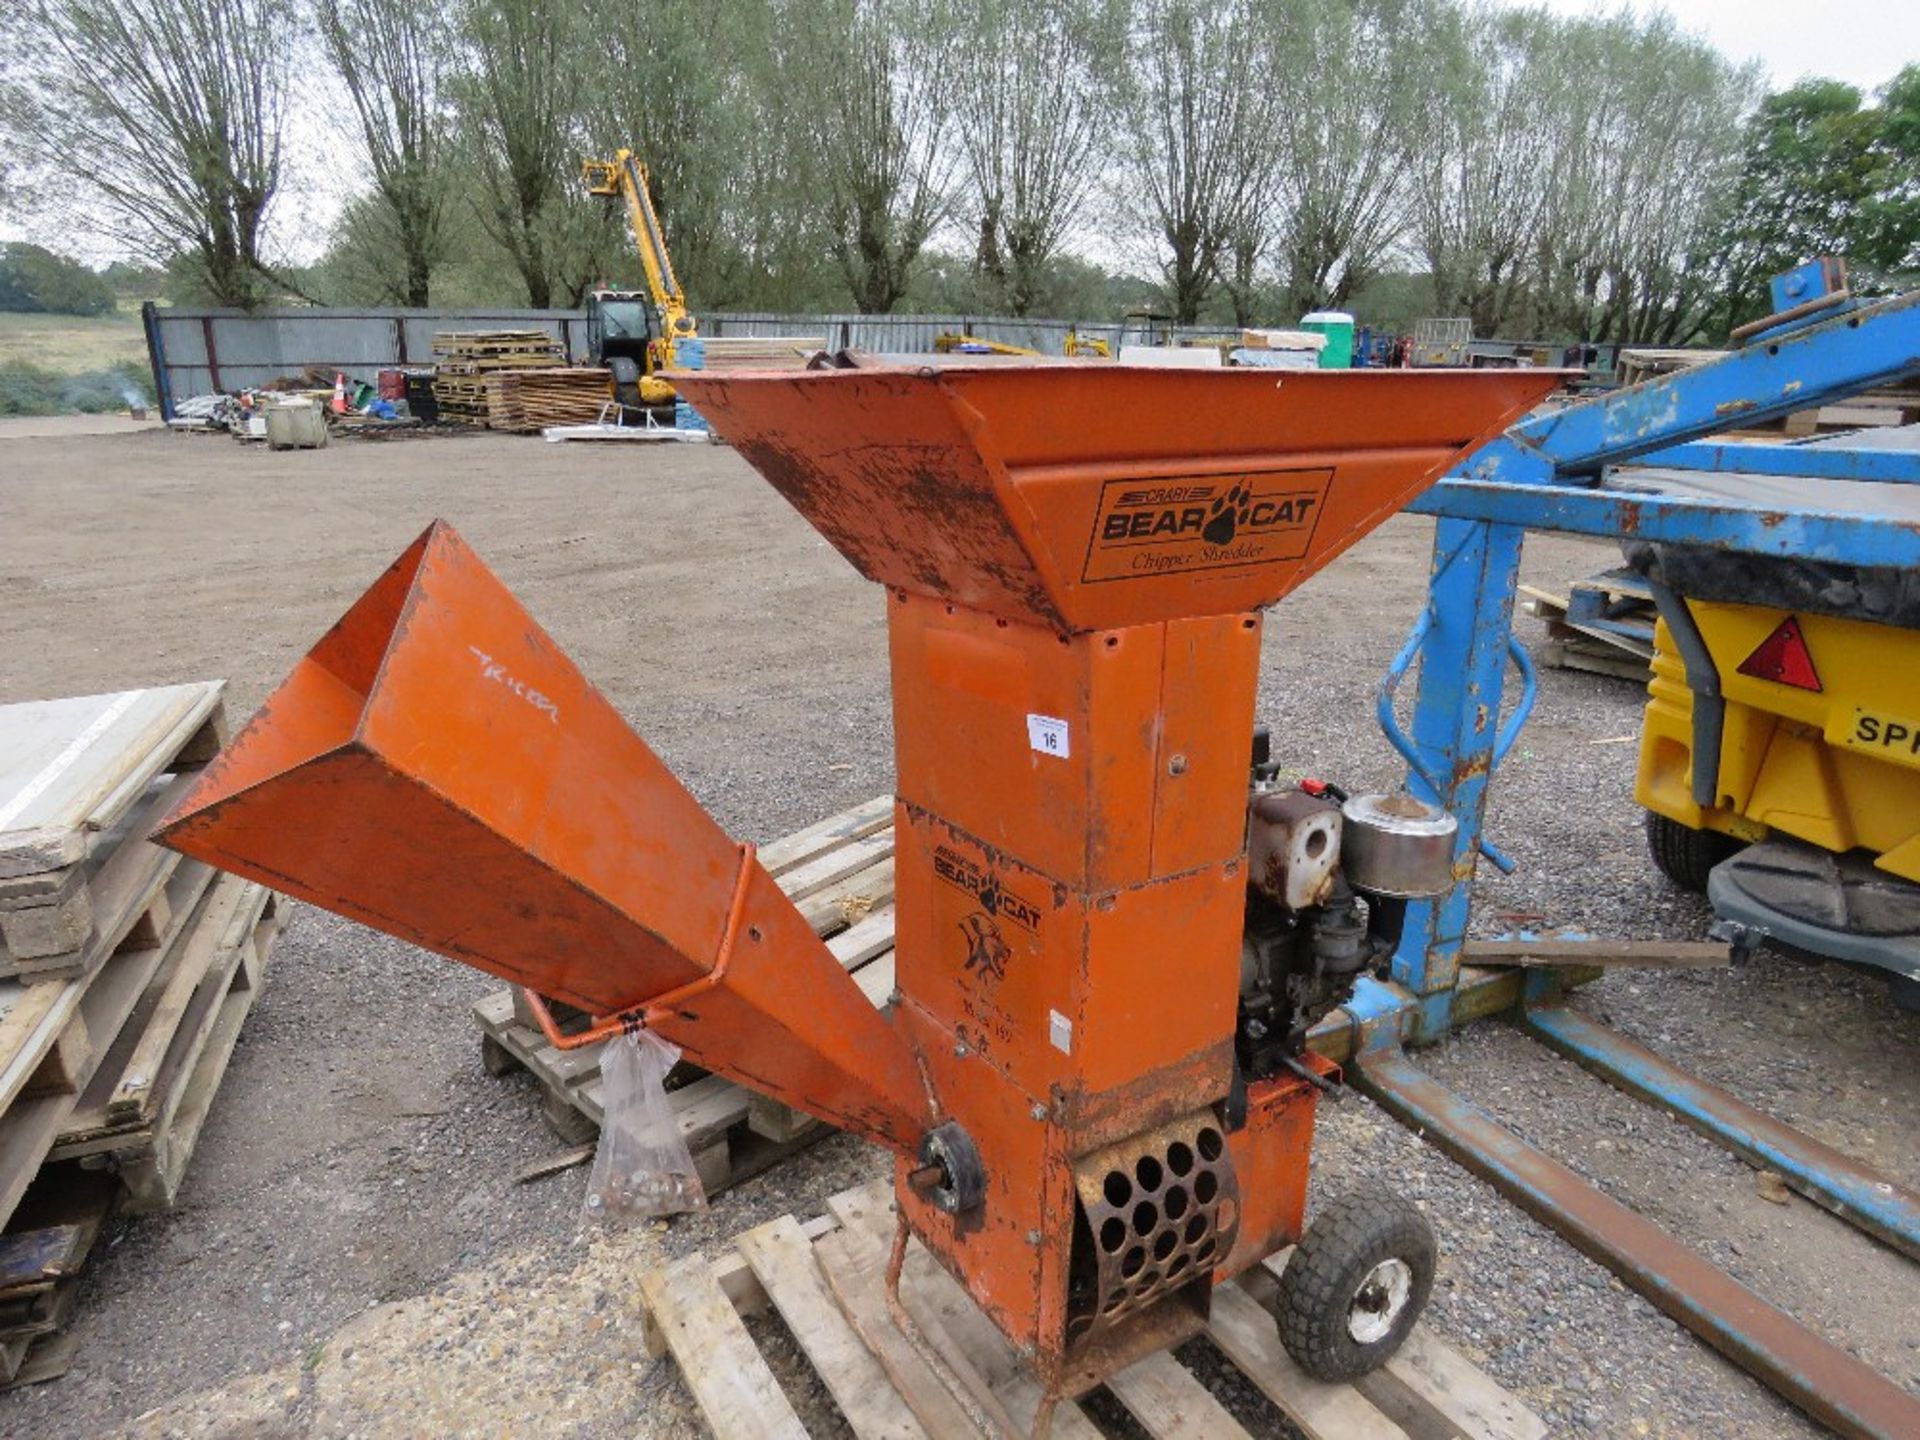 BEARCAT PETROL ENGINED SHREDDER/CHIPPER, NEEDS ATTENTION. THIS LOT IS SOLD UNDER THE AUCTIONEERS M